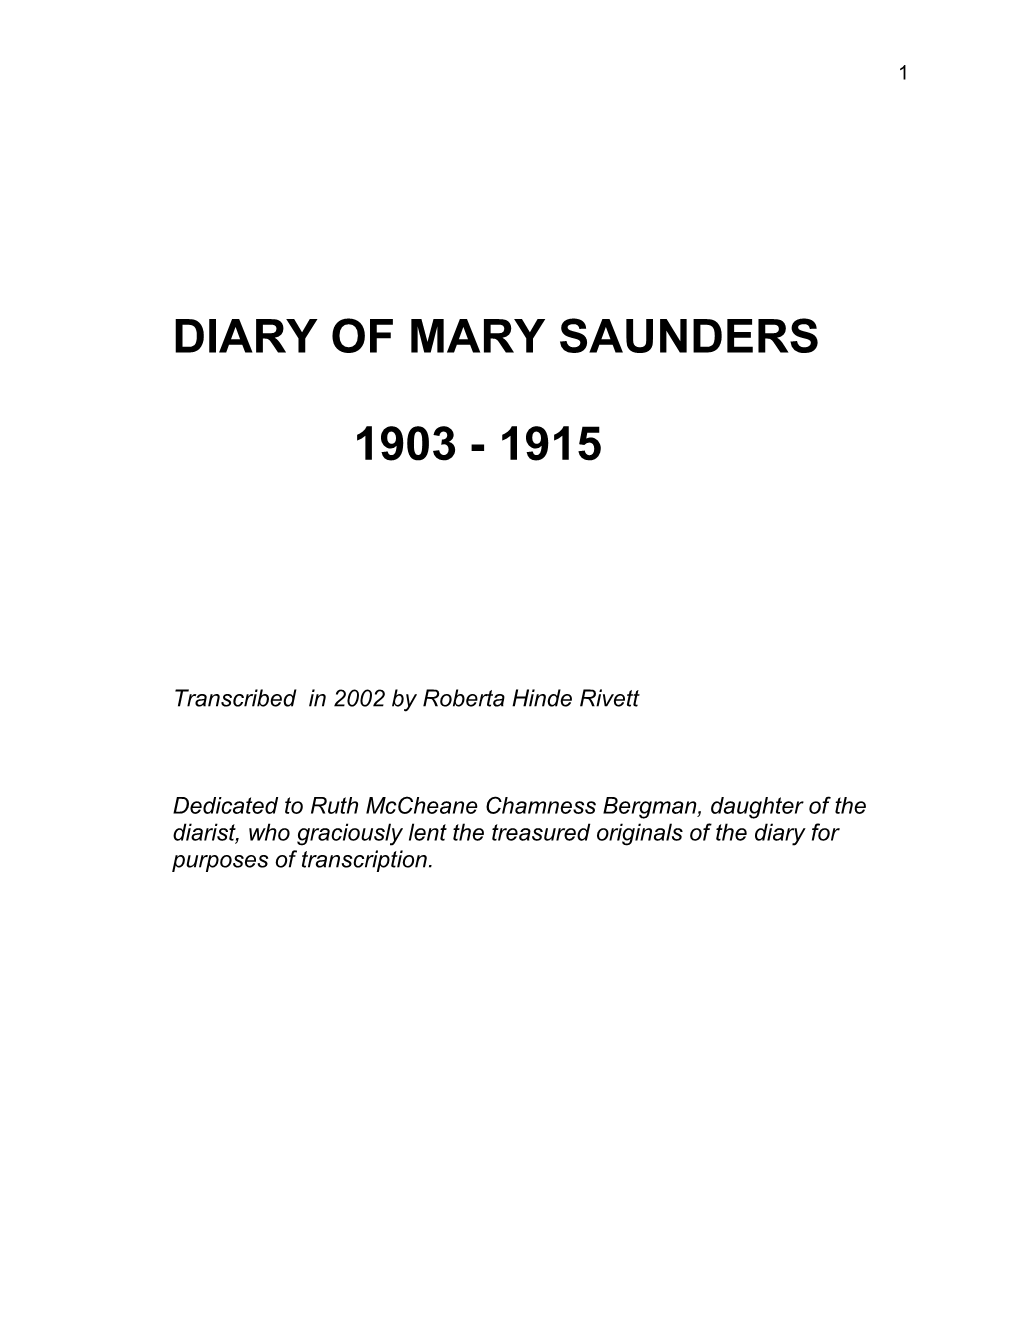 Diary of Mary Saunders Mccheane